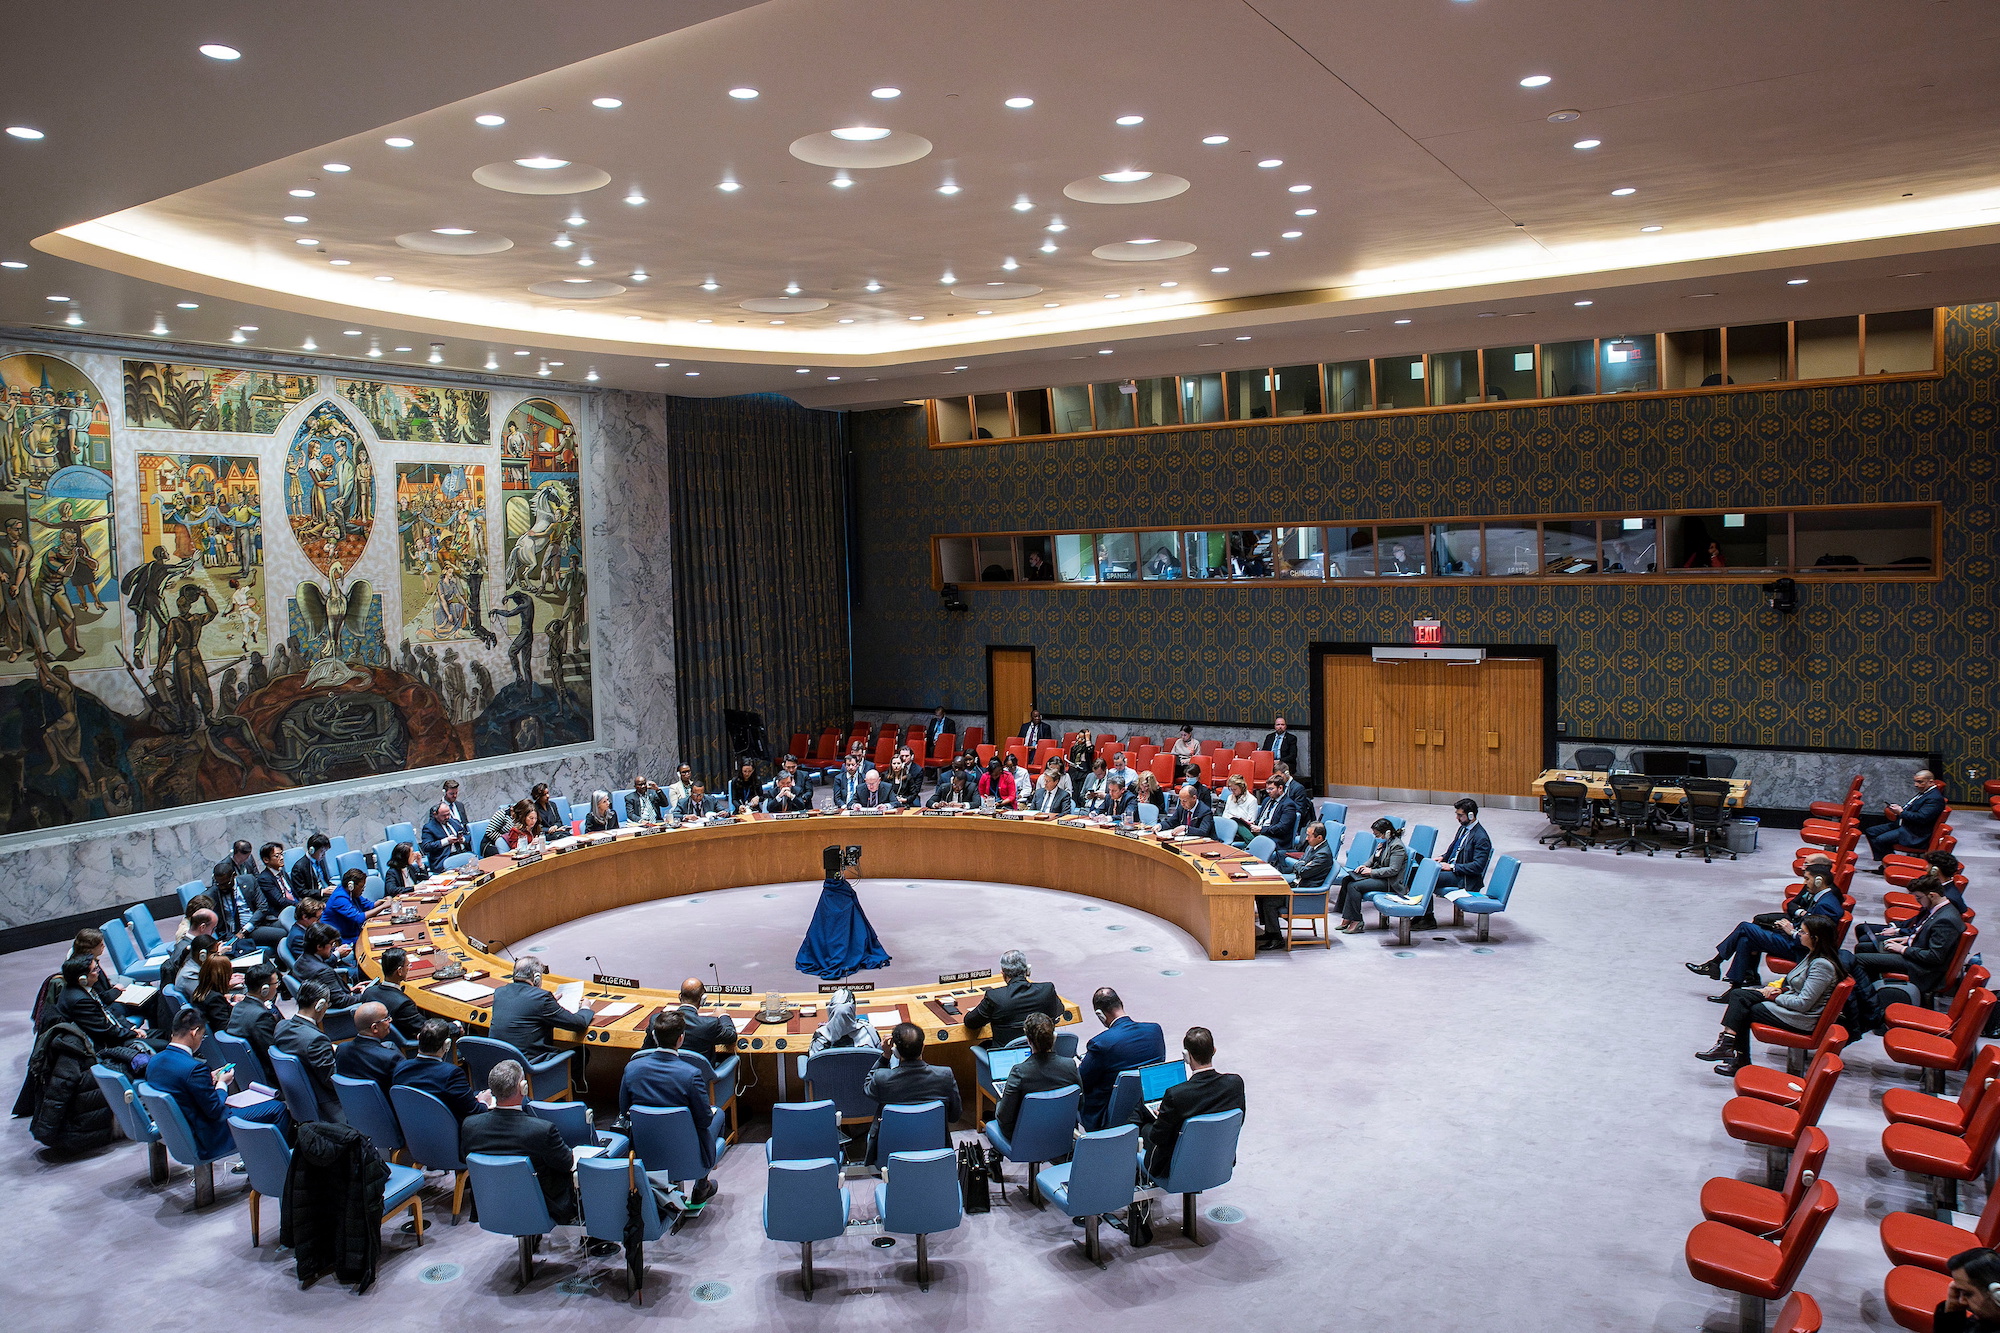 The United Nations Security Council meets at the UN headquarters in New York Cit on April 2.